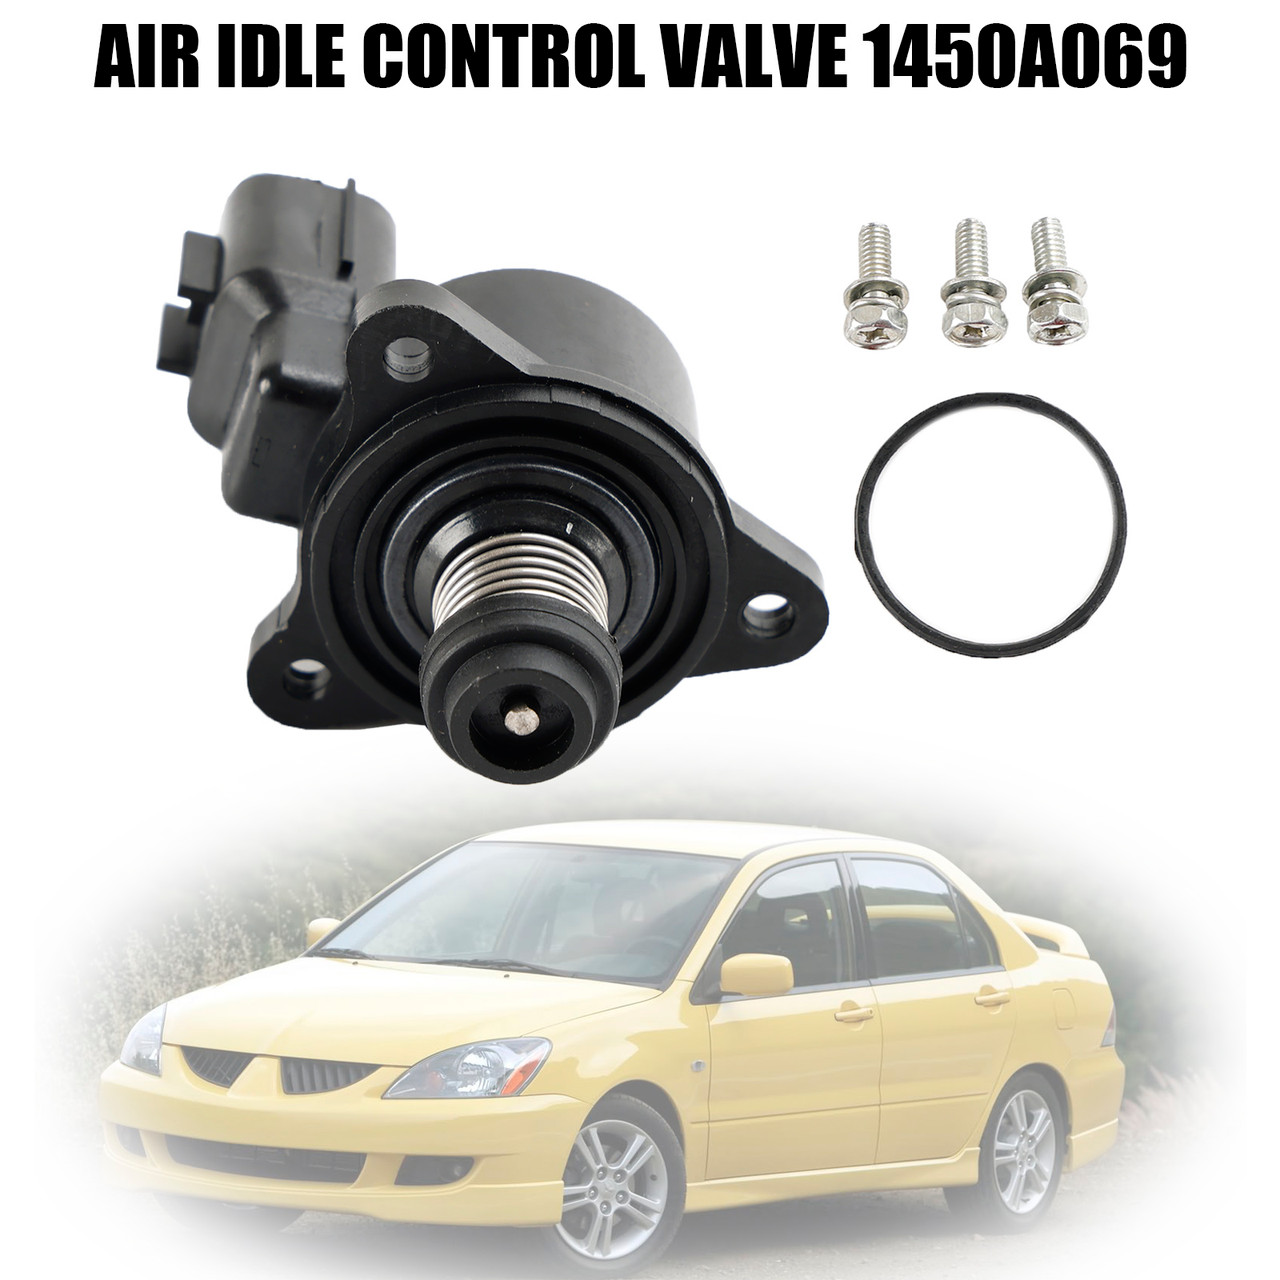 Throttle Air Idle Control Valve 1450A069 For Mitsubishi Lancer Eclipse 03-05